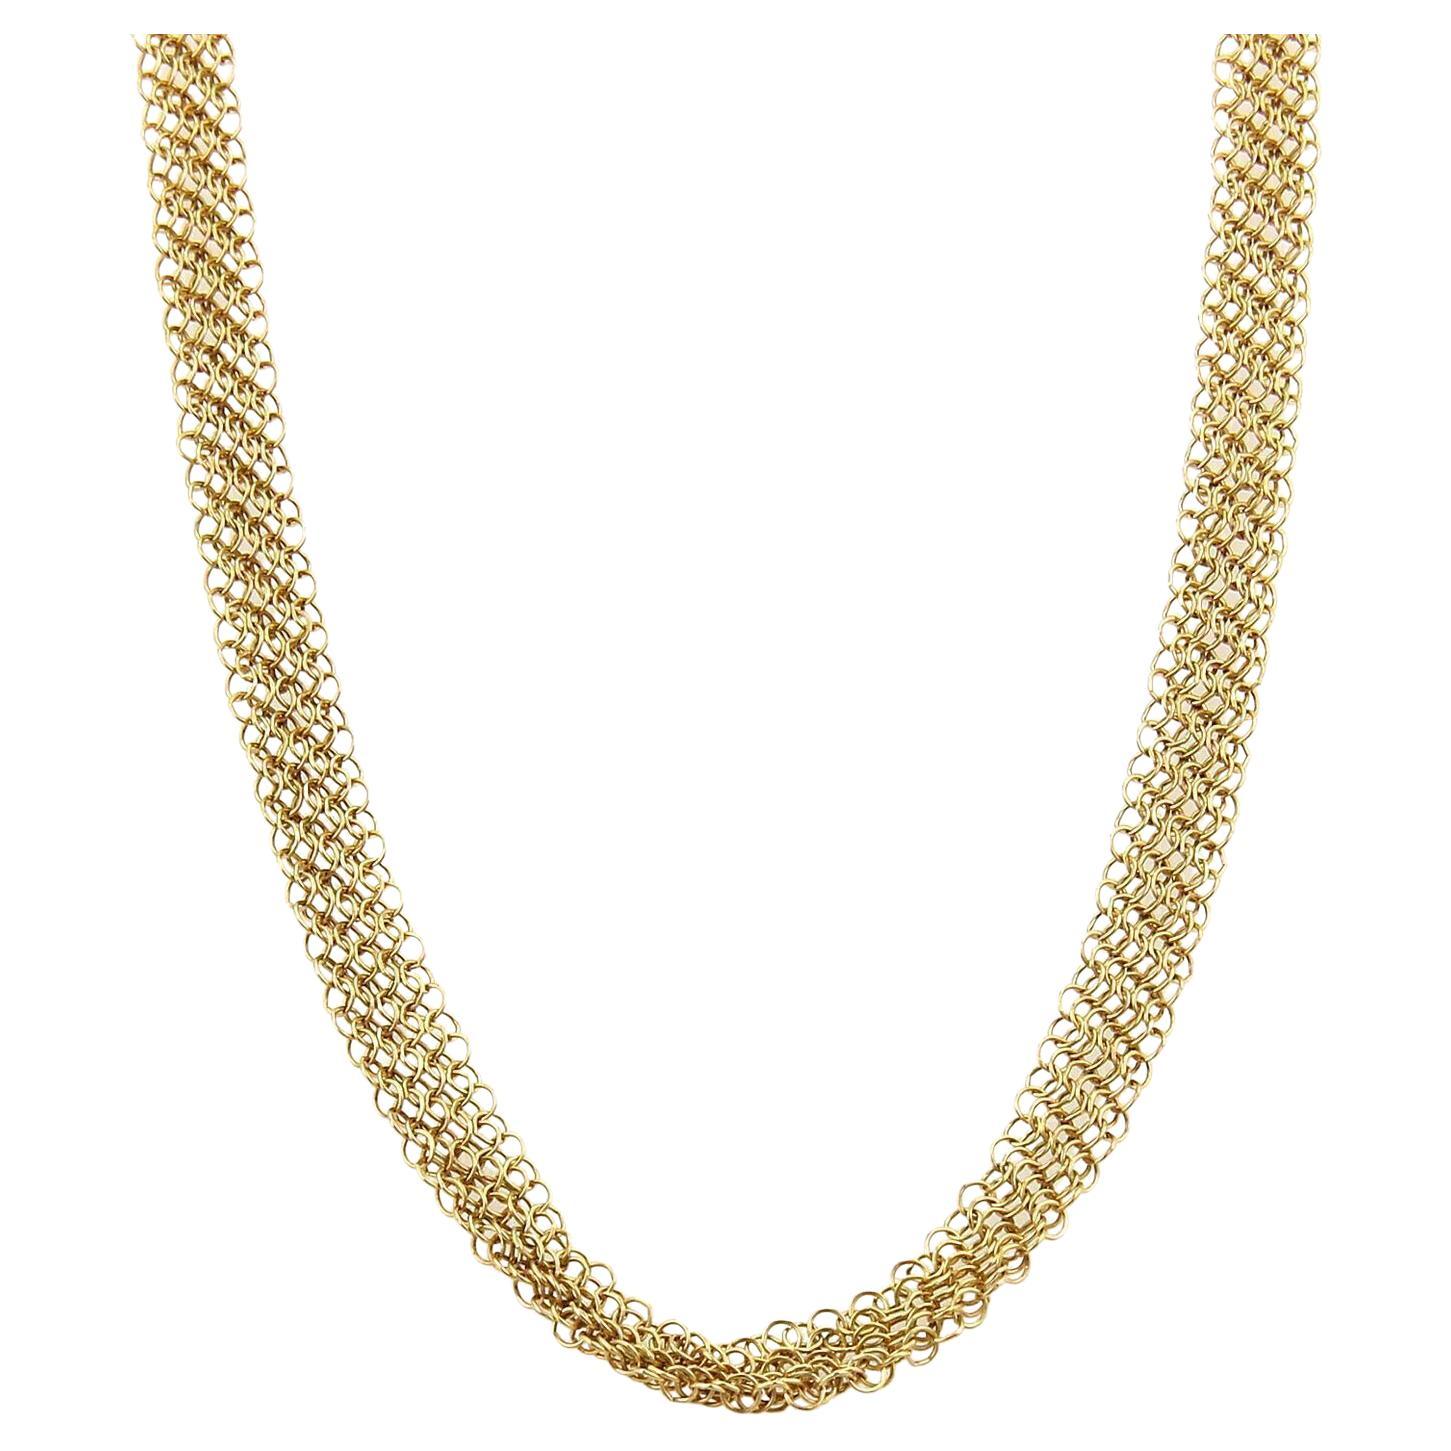 Tiffany & Co. Peretti 18k Yellow Gold 6mm Wide Mesh Chain Necklace 30" Long For Sale